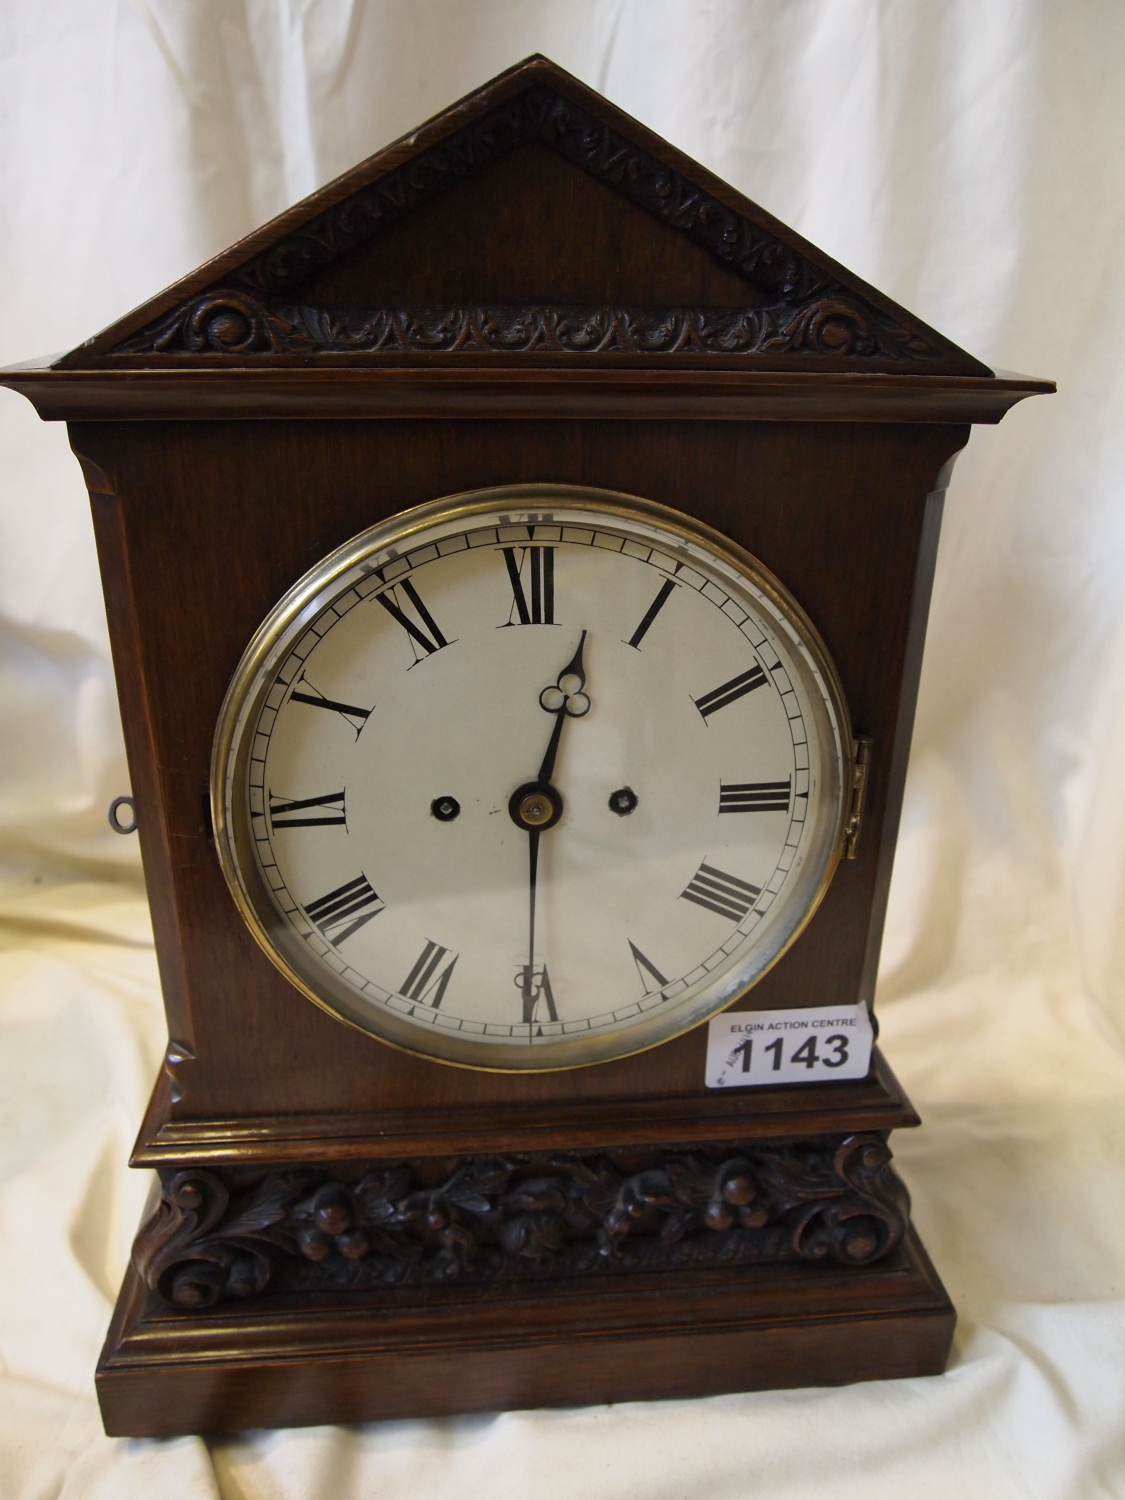 Sale Item:    DOUBLE FUSEE CLOCK WITH BRACKET BEVELLED GLASS SIDES  Vat Status:   No Vat   Buyers